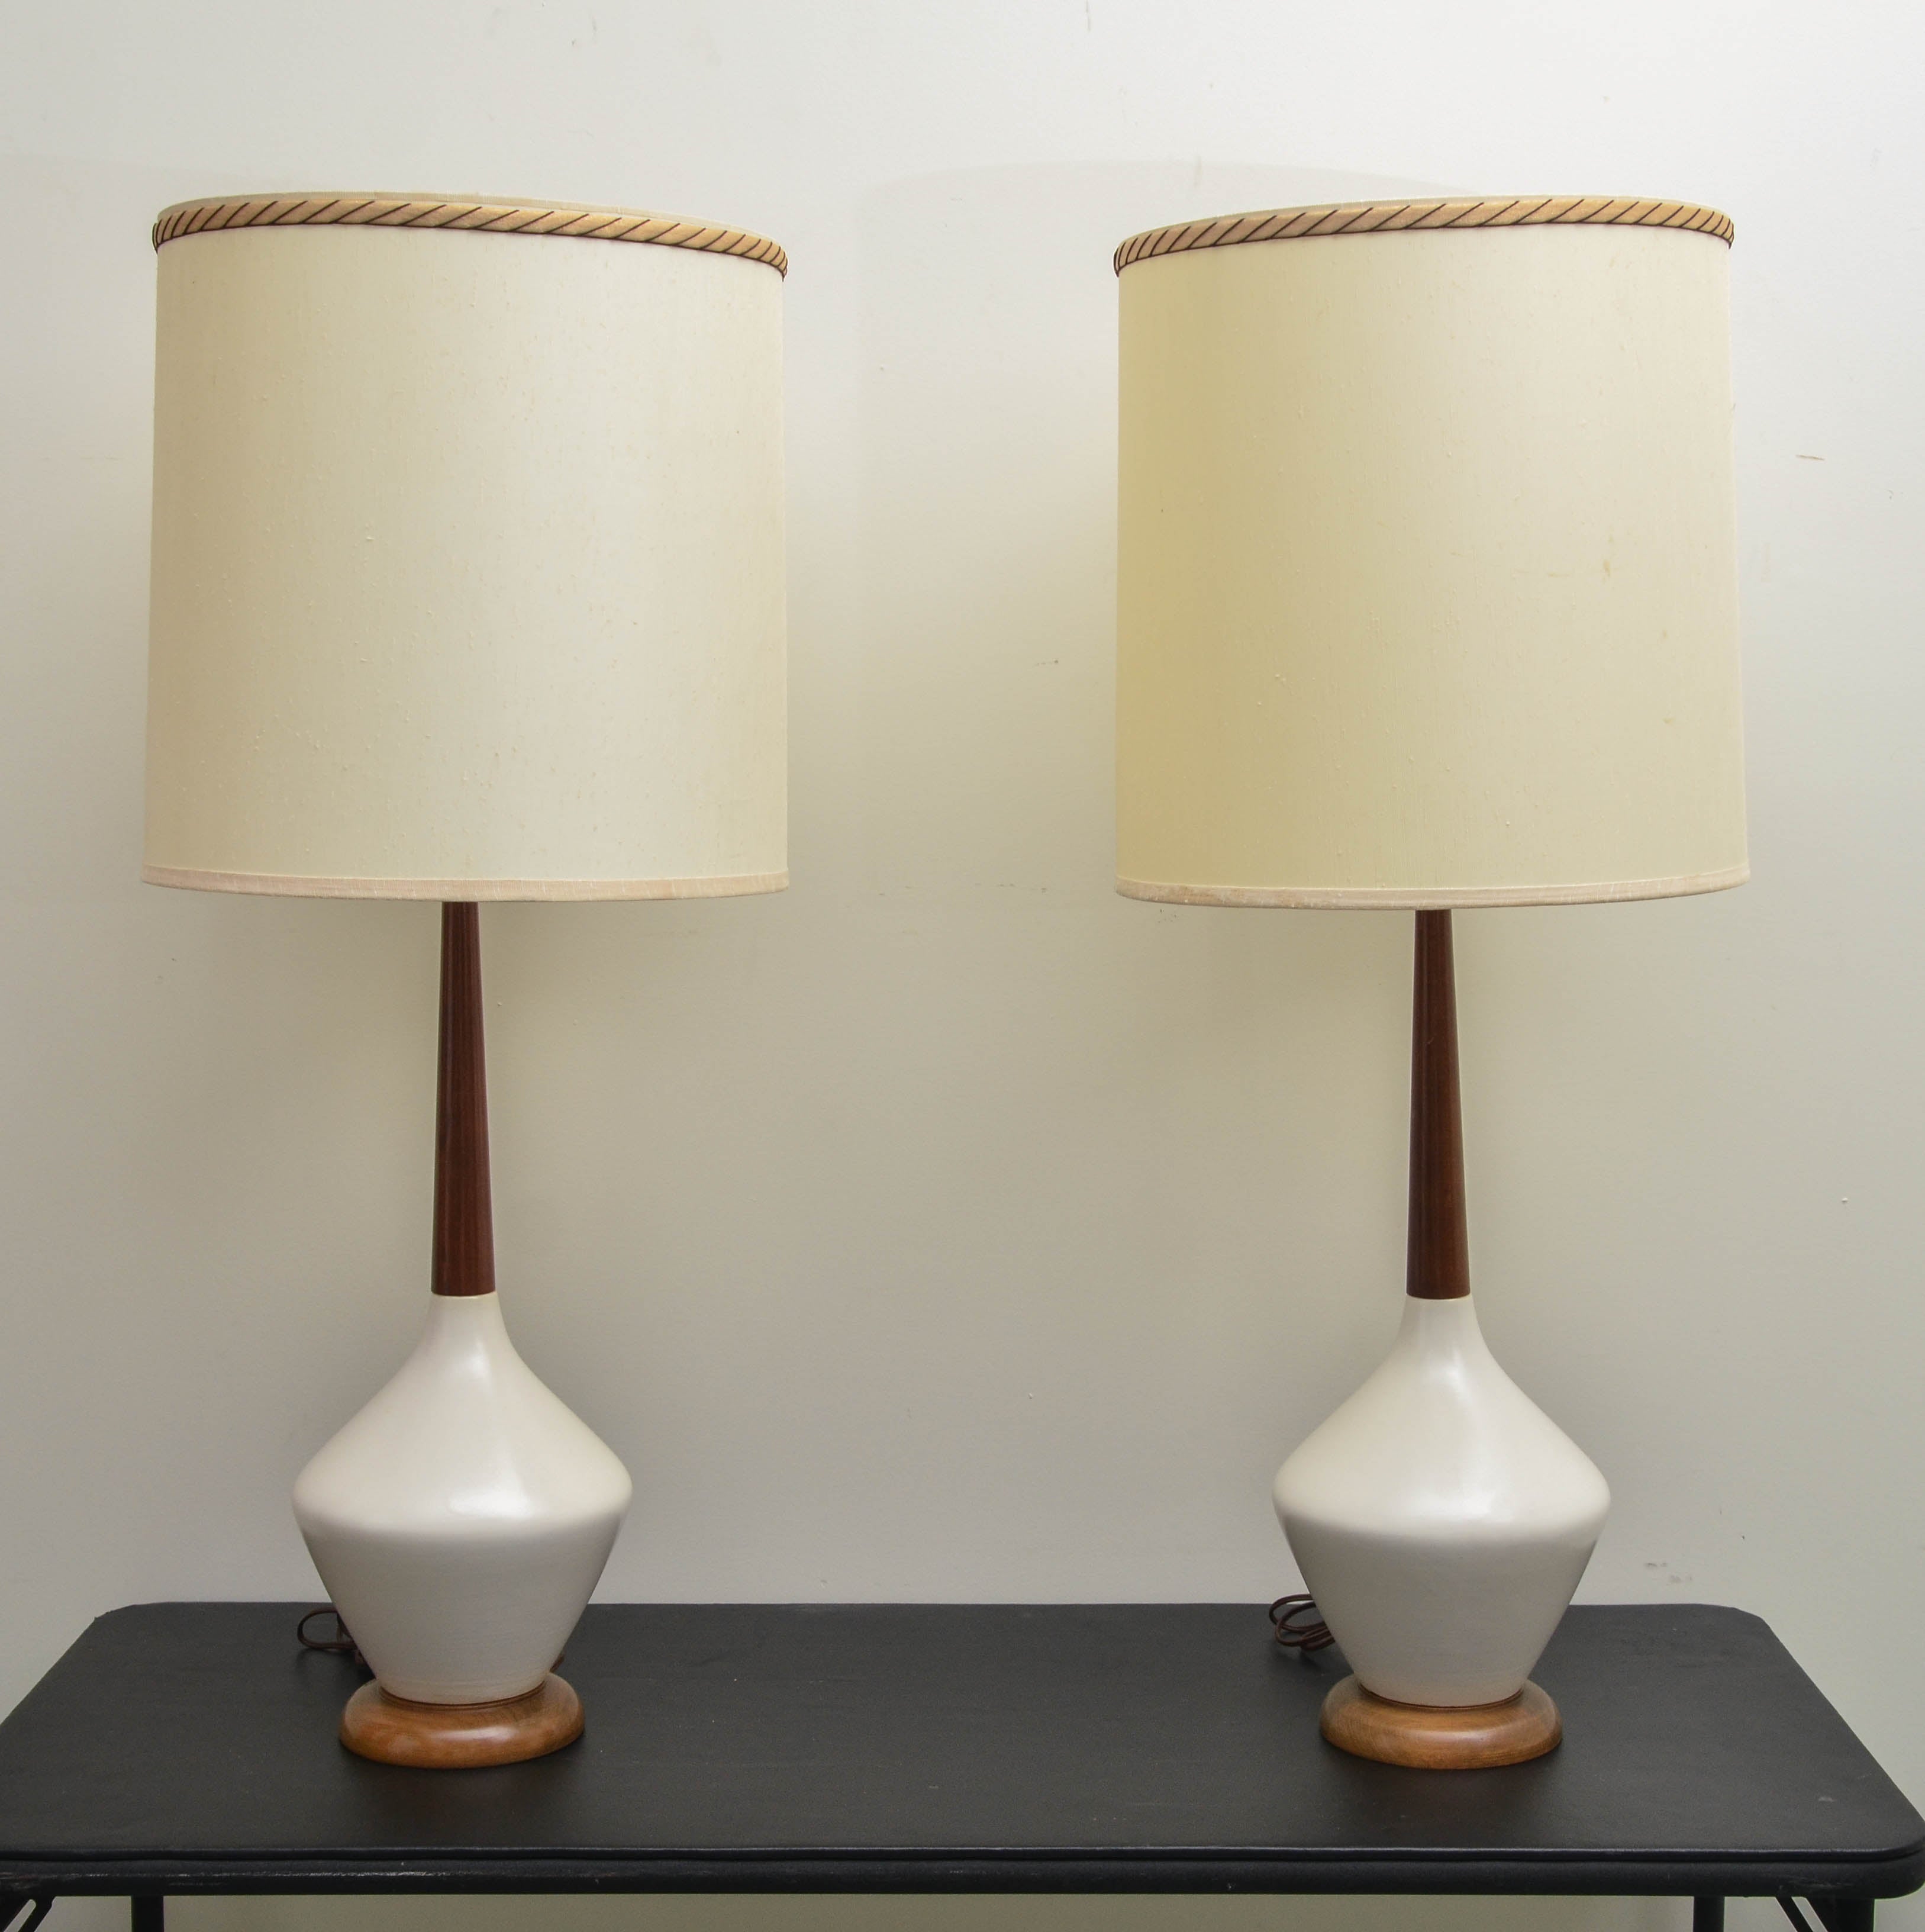 Midcentury Pair of Walnut and Ceramic Table Lamps